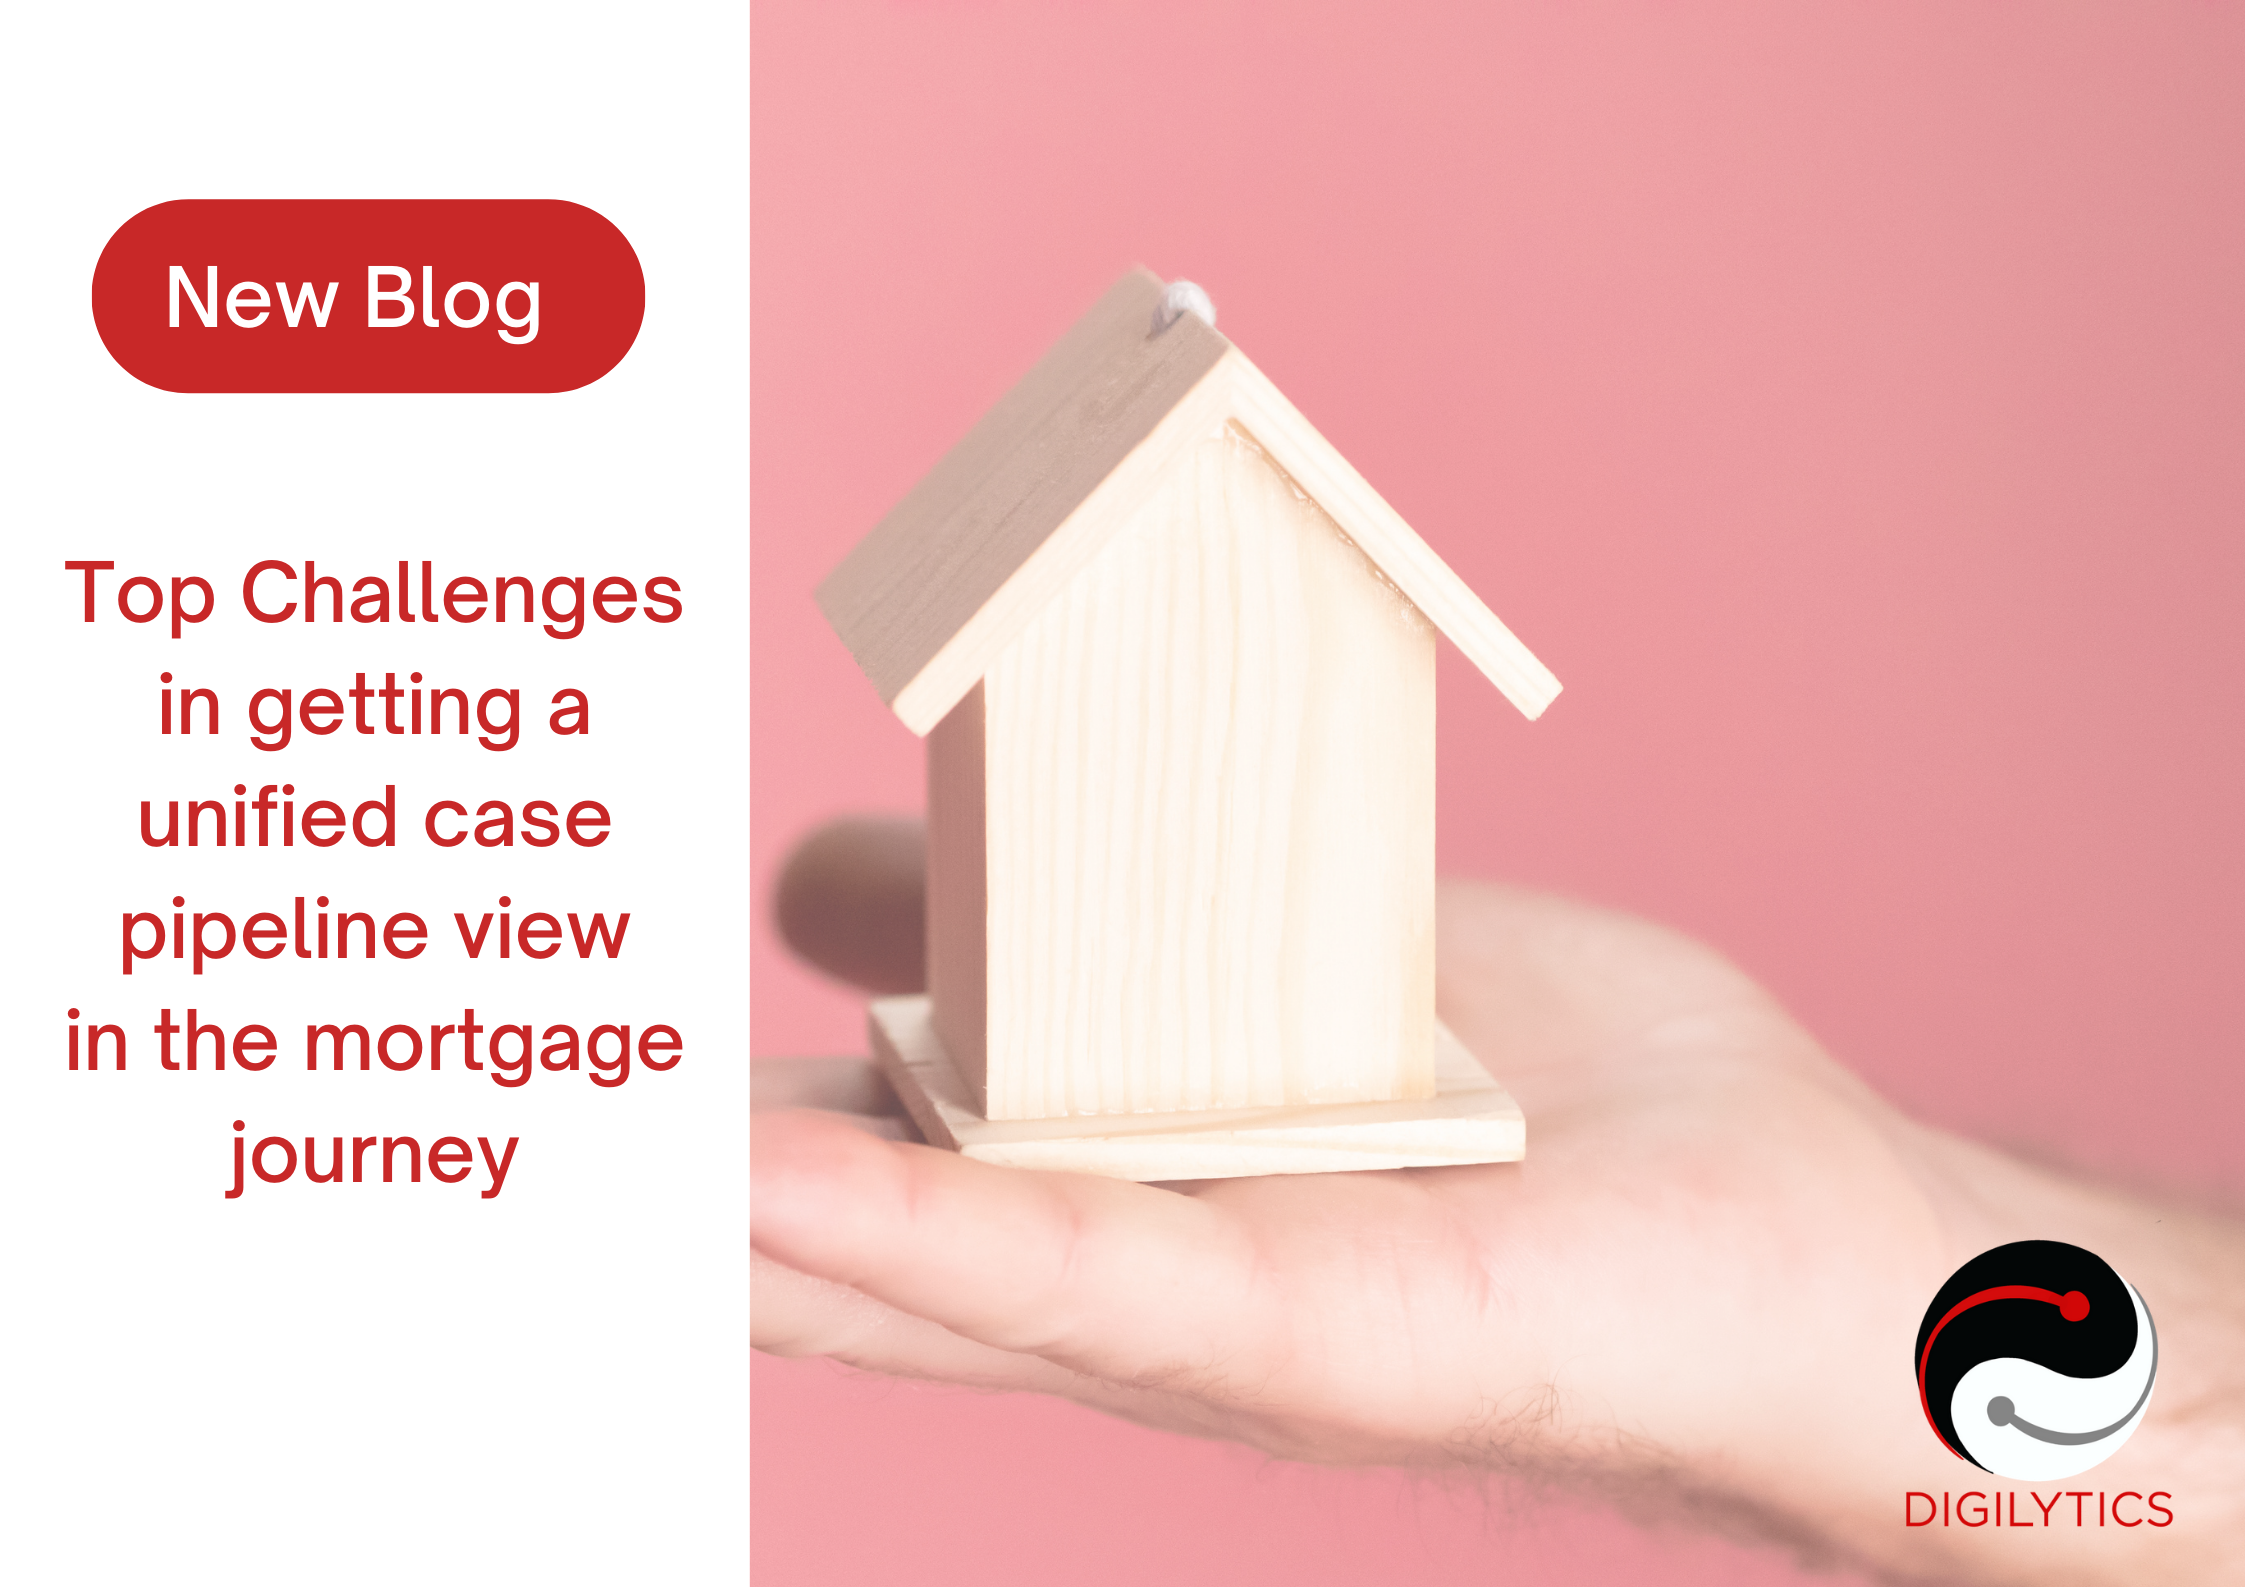 Top 5 Challenges in getting a unified case pipeline view in the mortgage journey